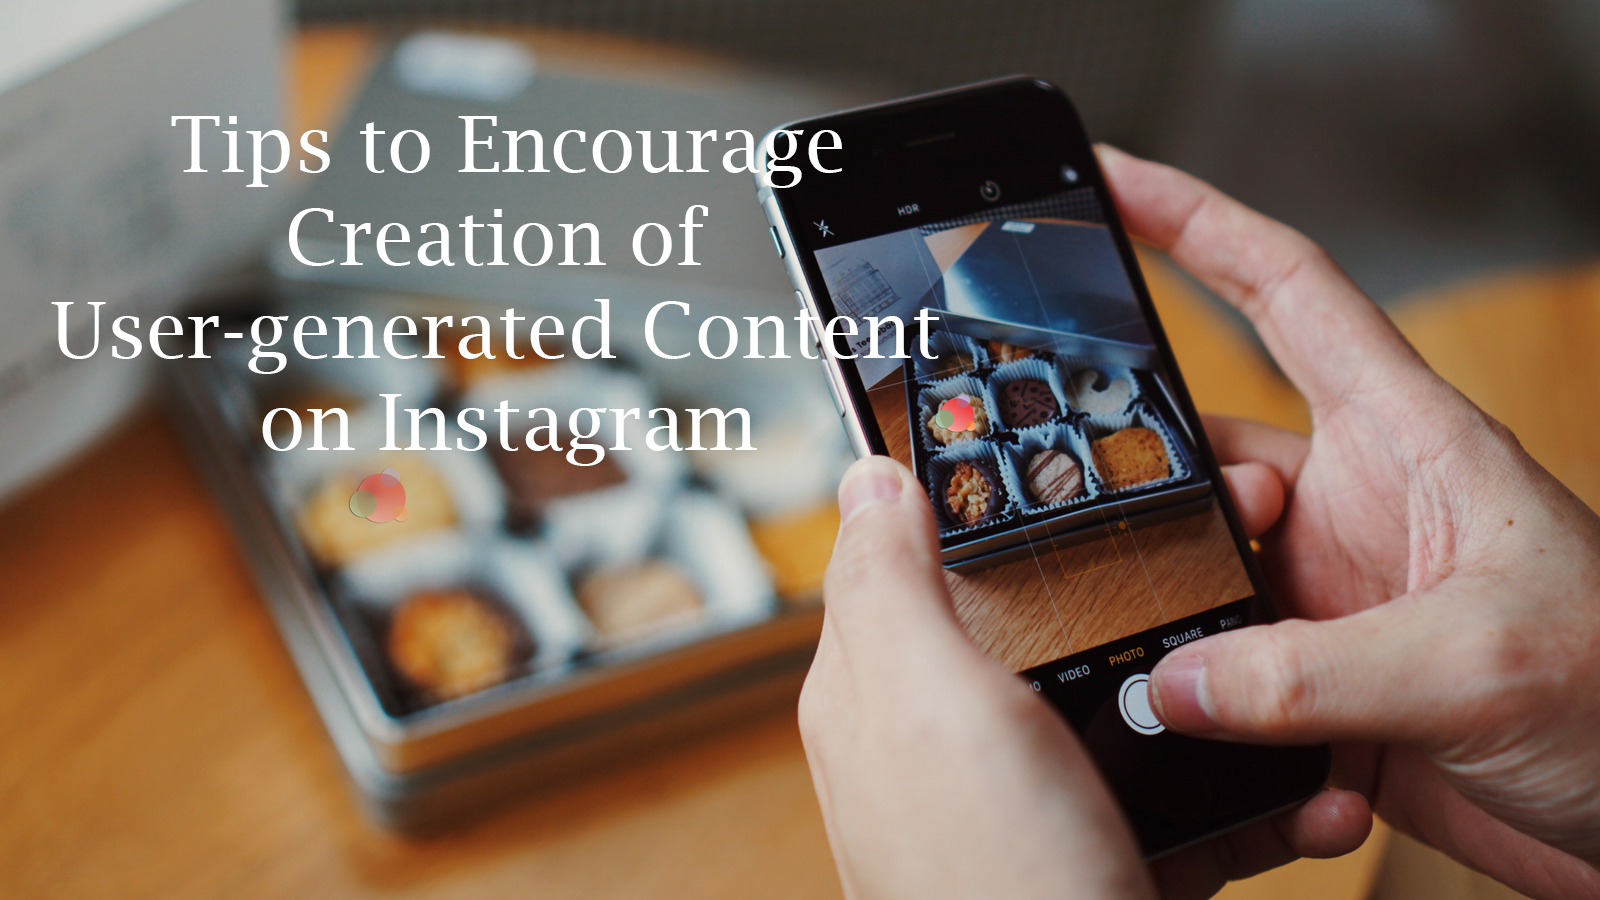 user-generated content